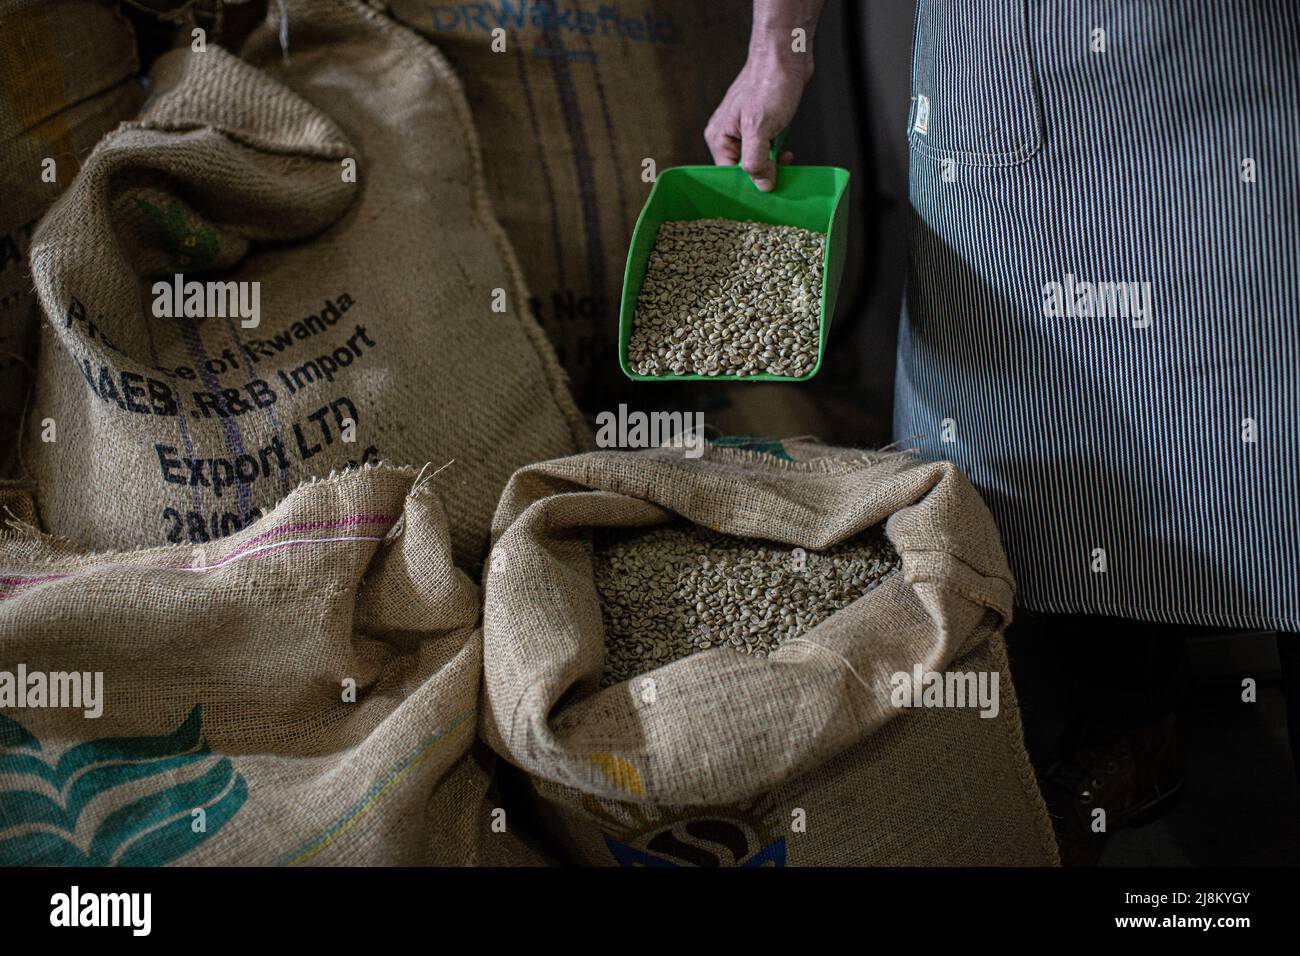 Male hands taking scoop of green unroasted coffee beans in burlap sack Stock Photo